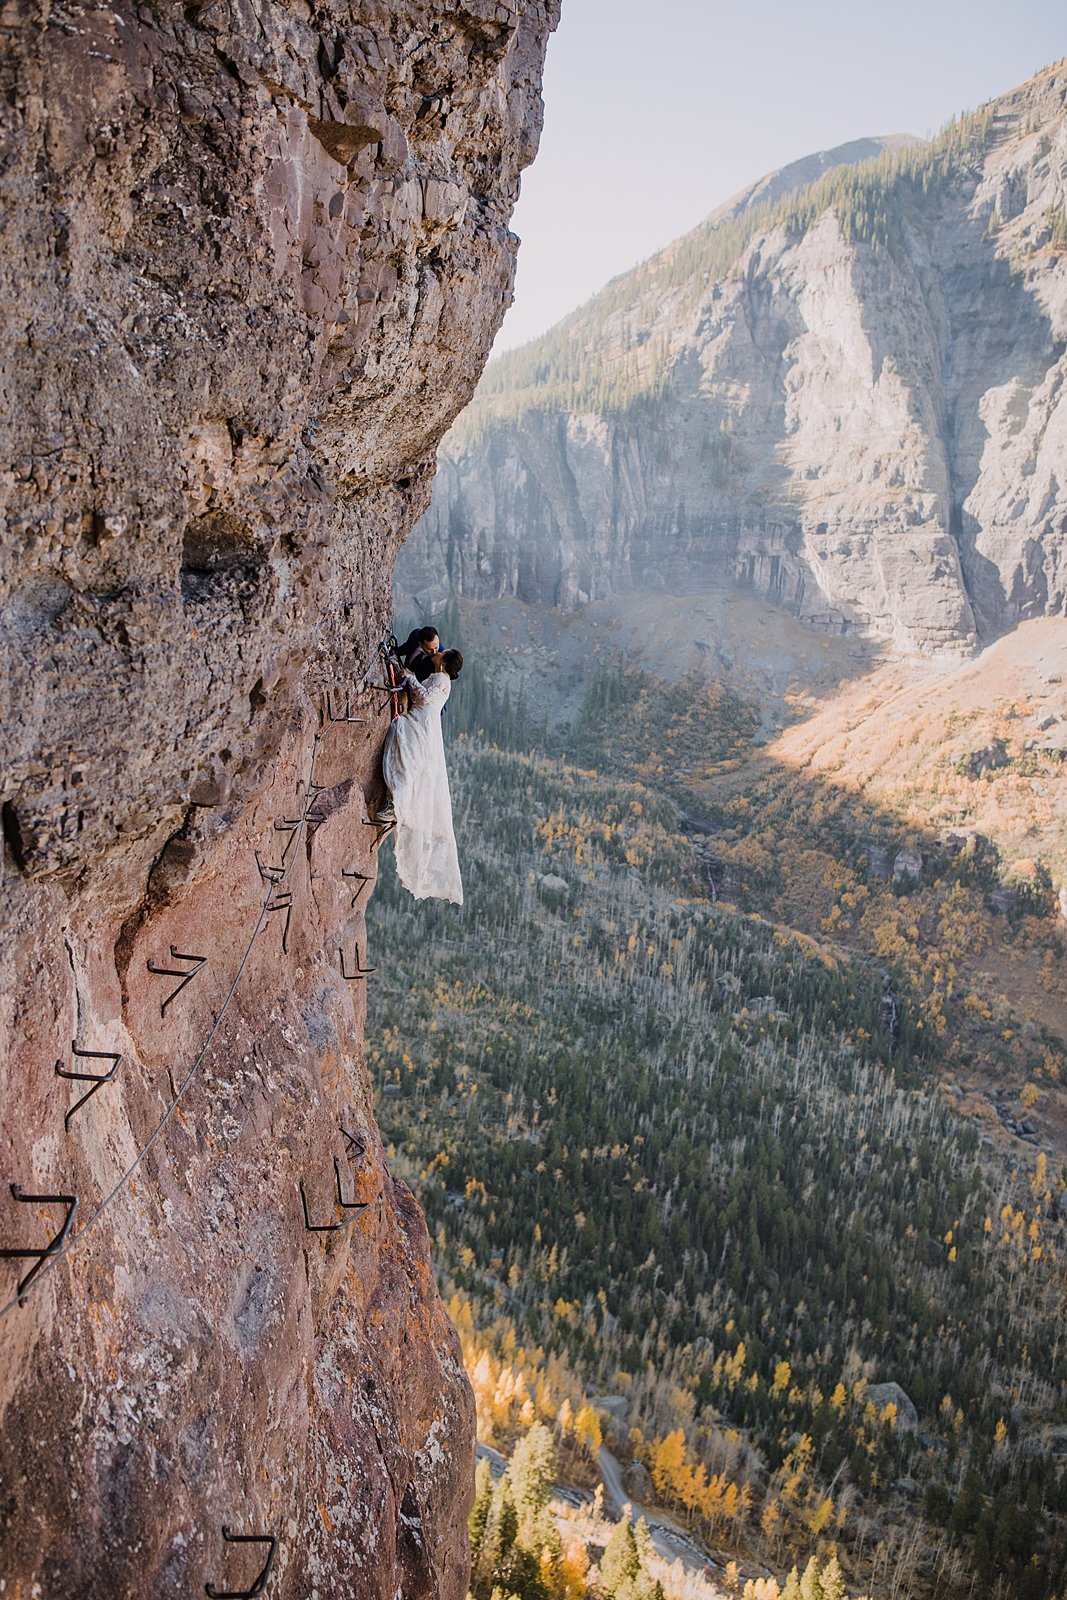 bride and groom eloping on a cliff edge, eloping on the via ferrata's main event, rocky mountain range climbing, hiking the telluride via ferrata trail, high alpine mountaineering elopement